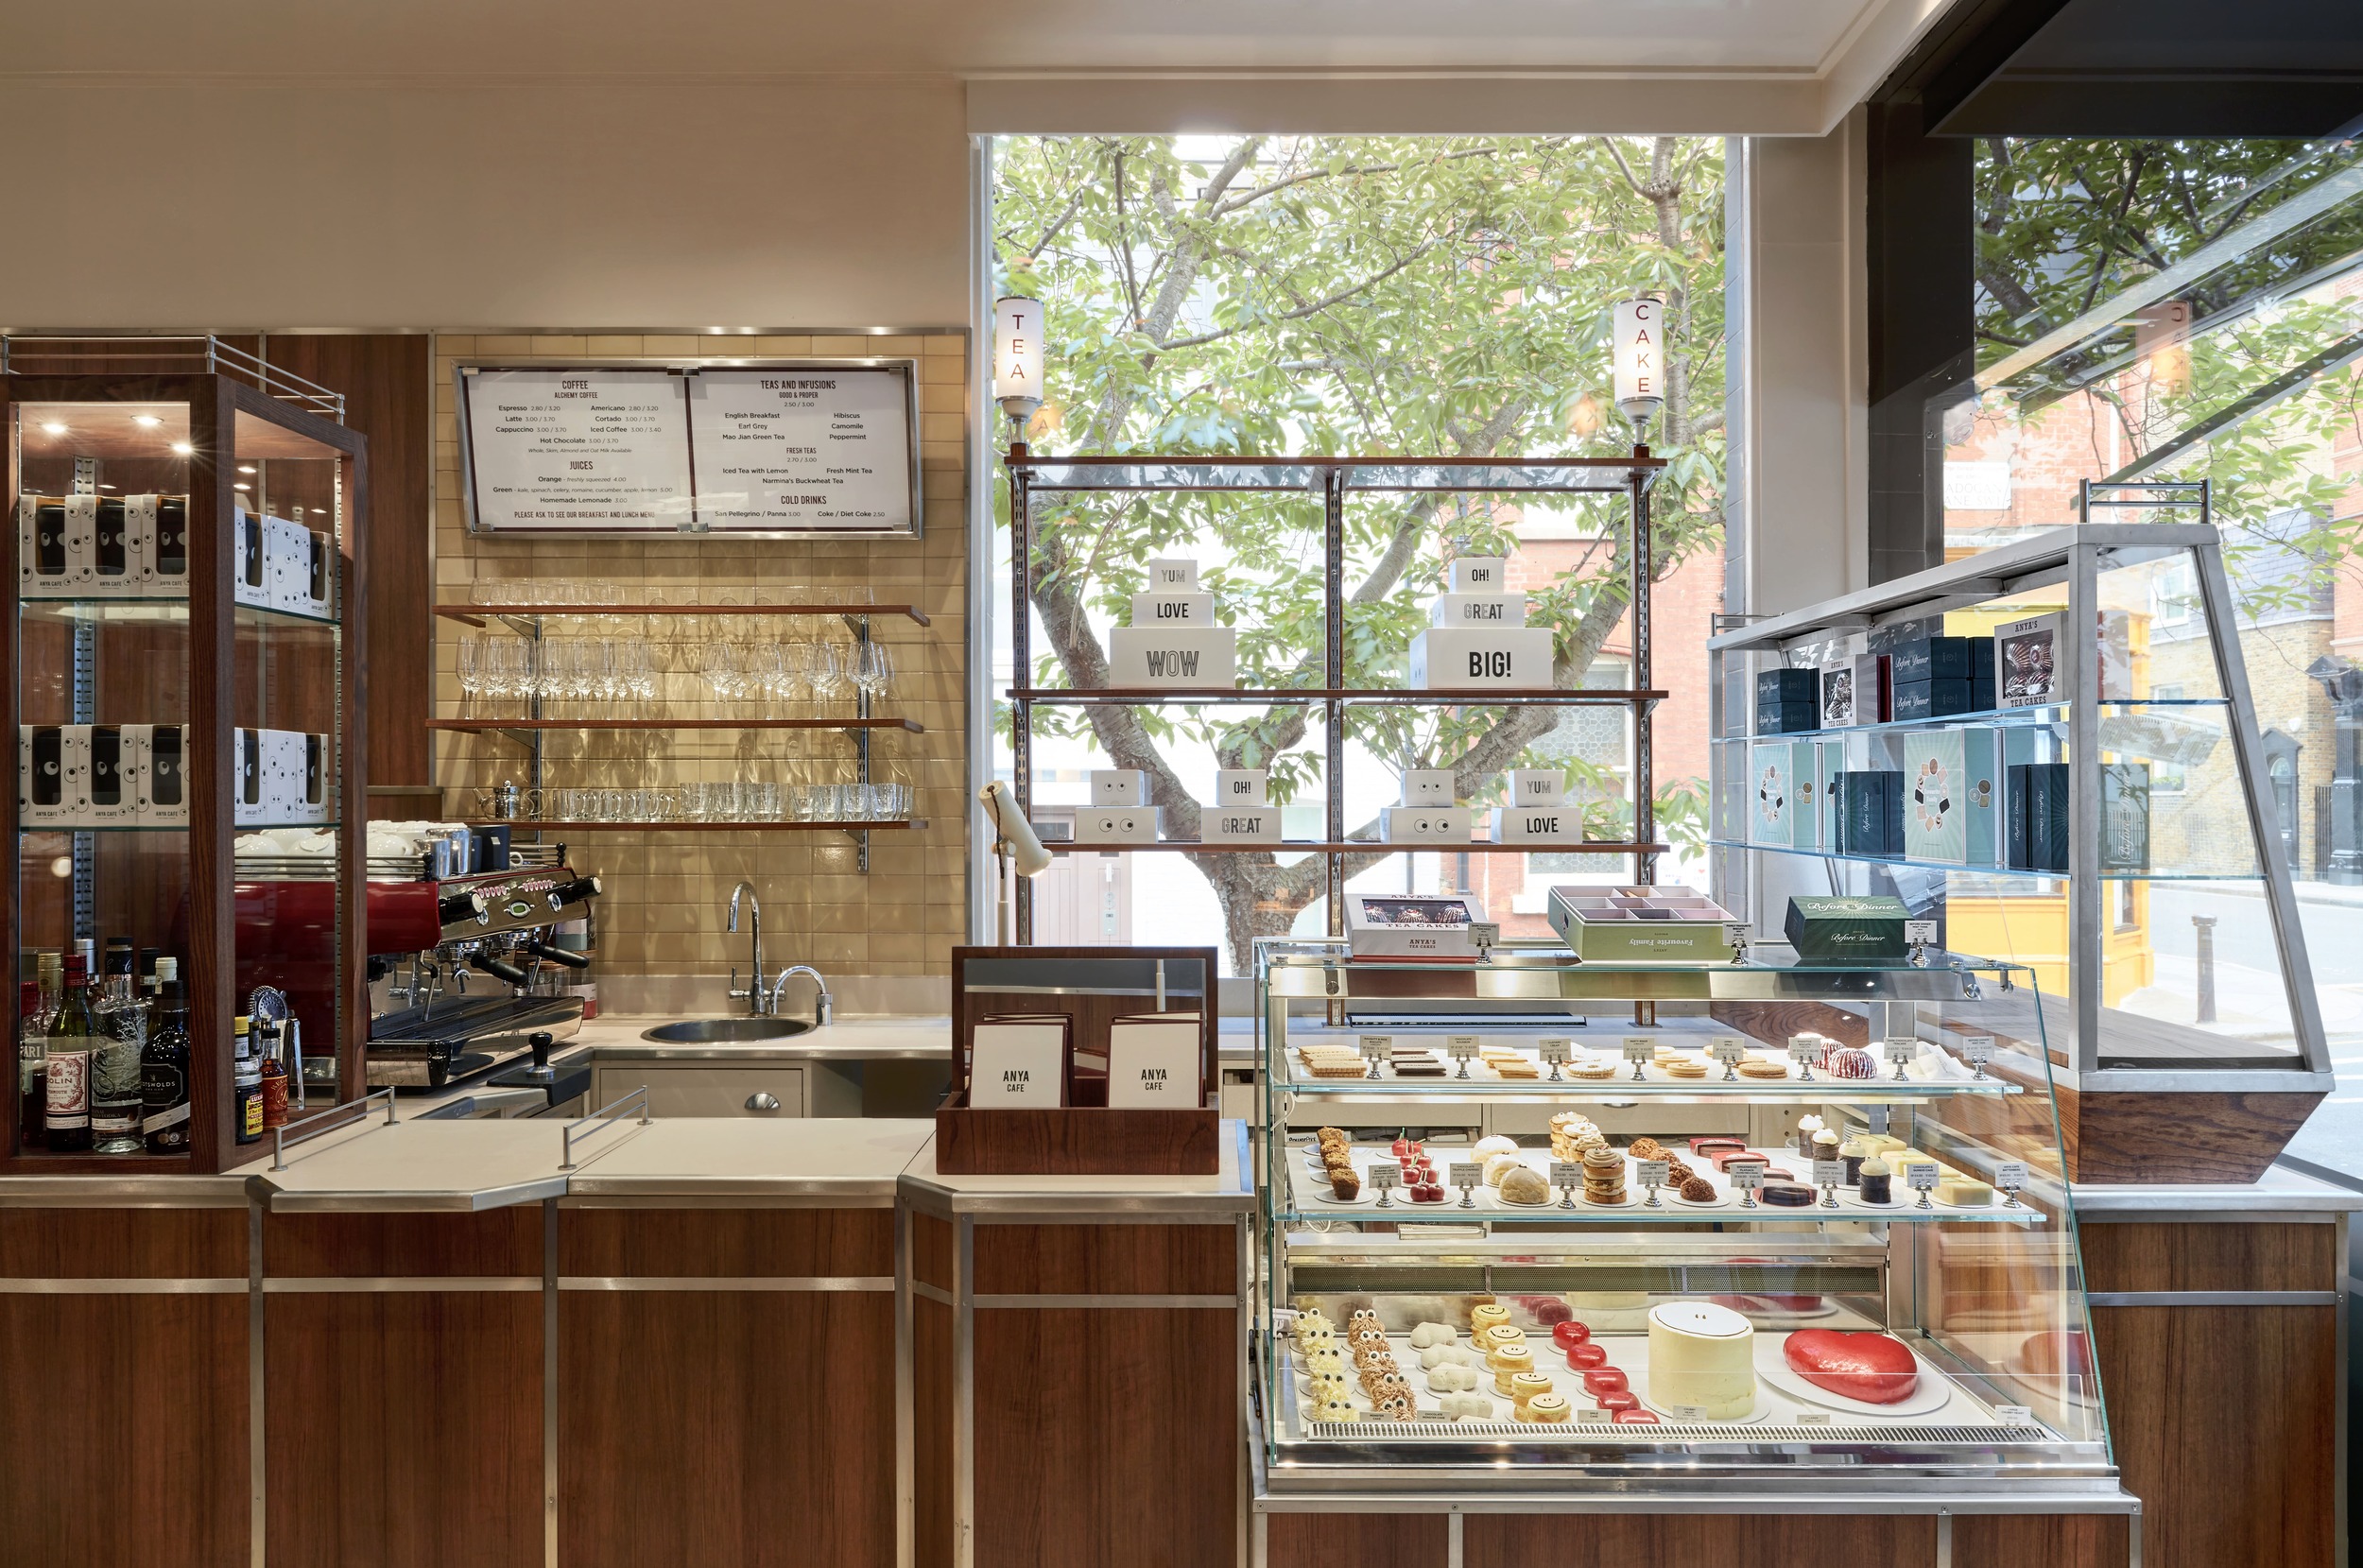 Elegant café counter with picturesque pastry displays and rear shelving